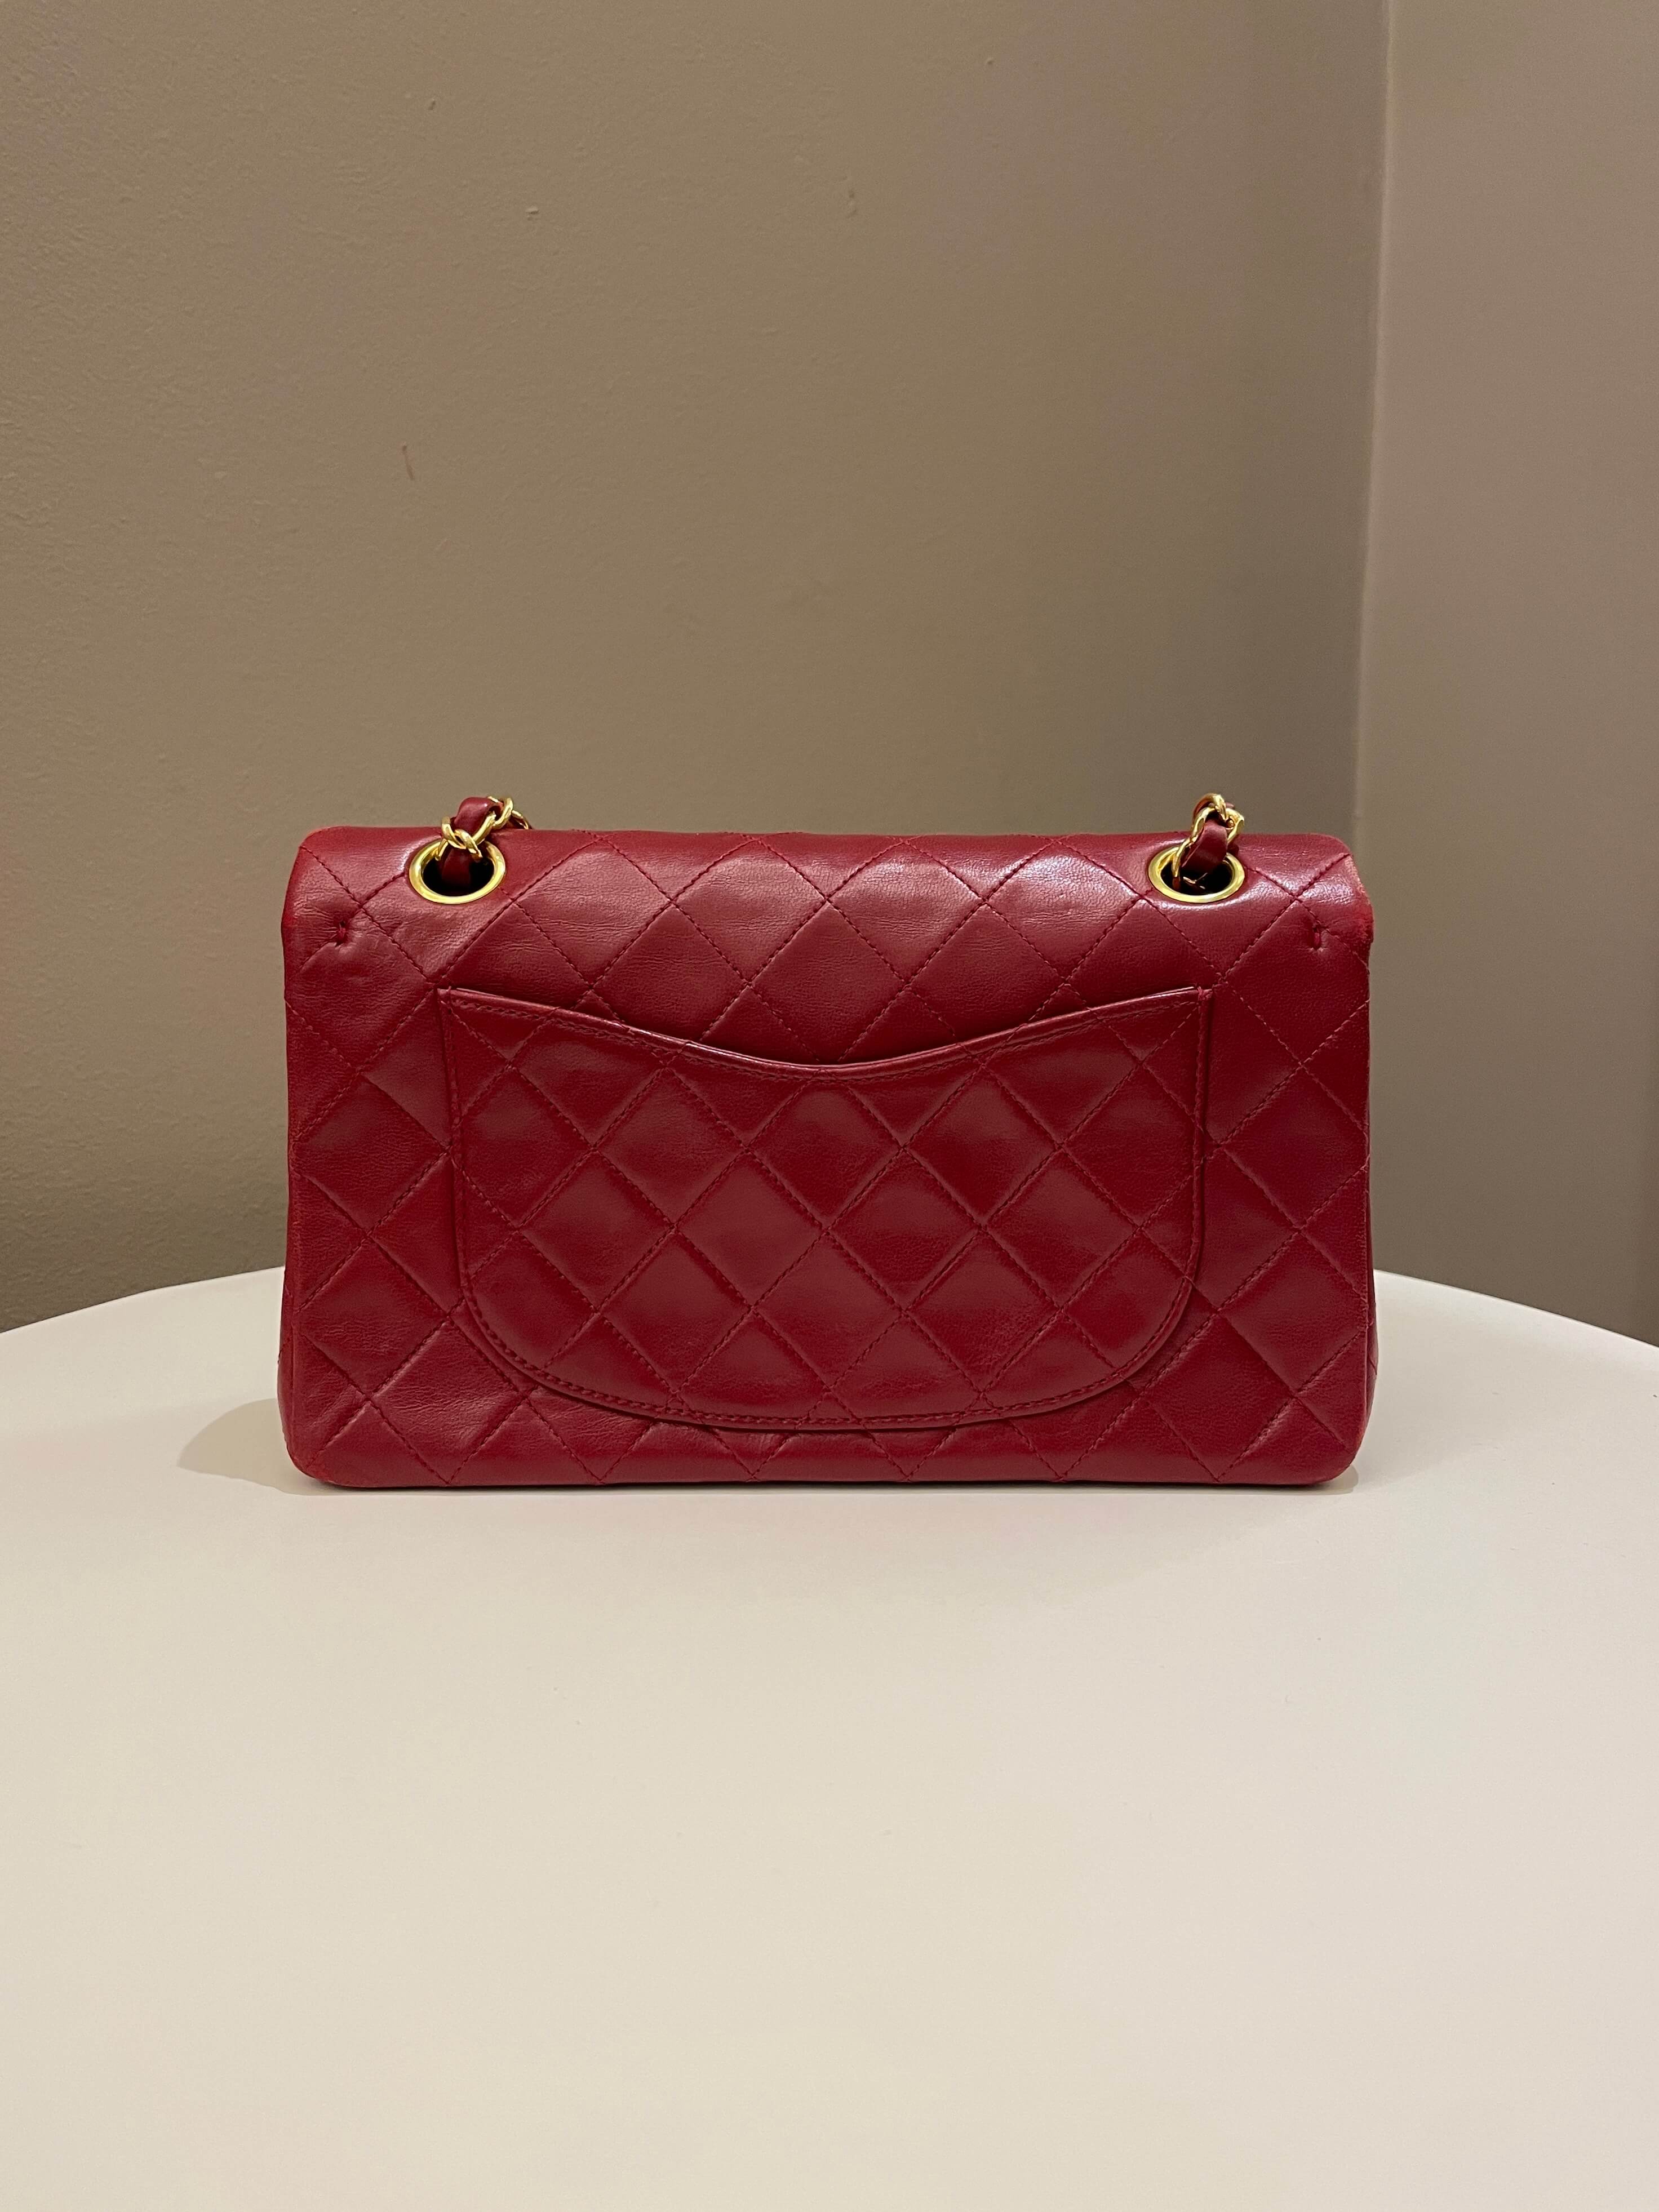 Chanel Vintage Classic Small Double Flap Red Lambskin